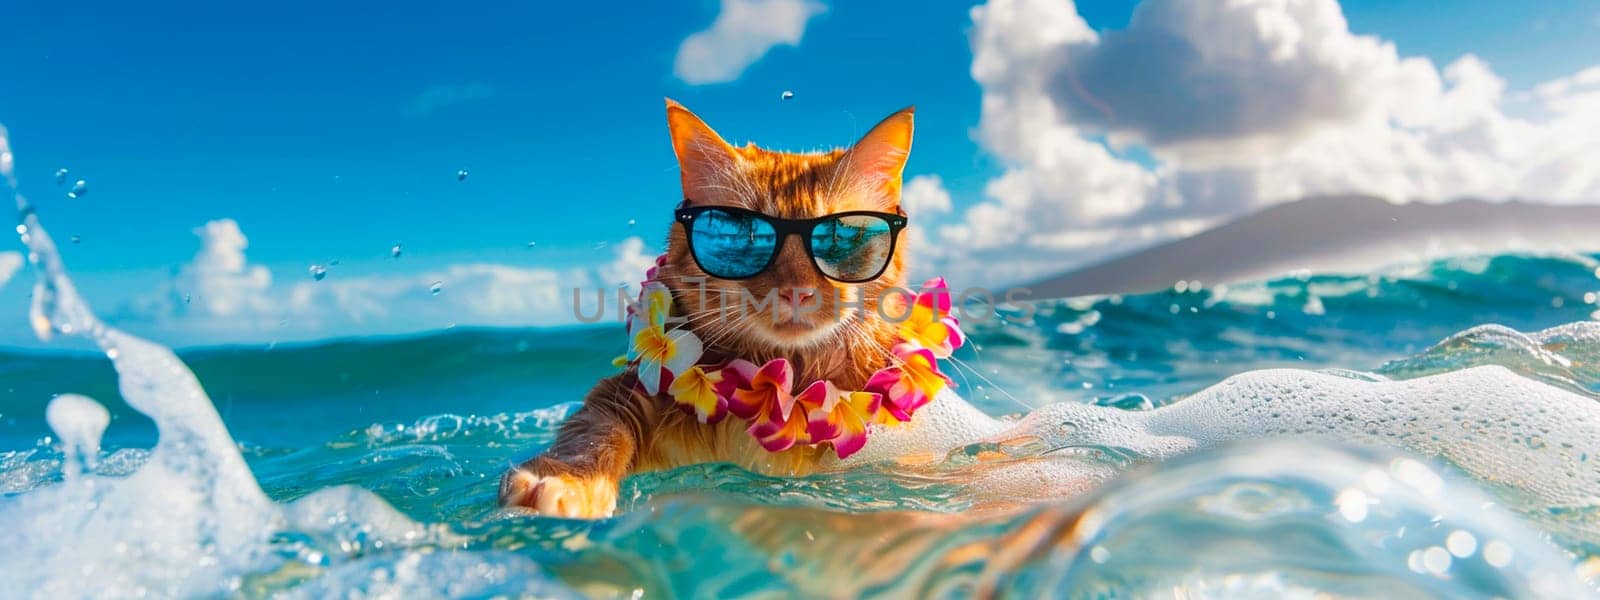 the cat swims on the surf. Selective focus. by yanadjana